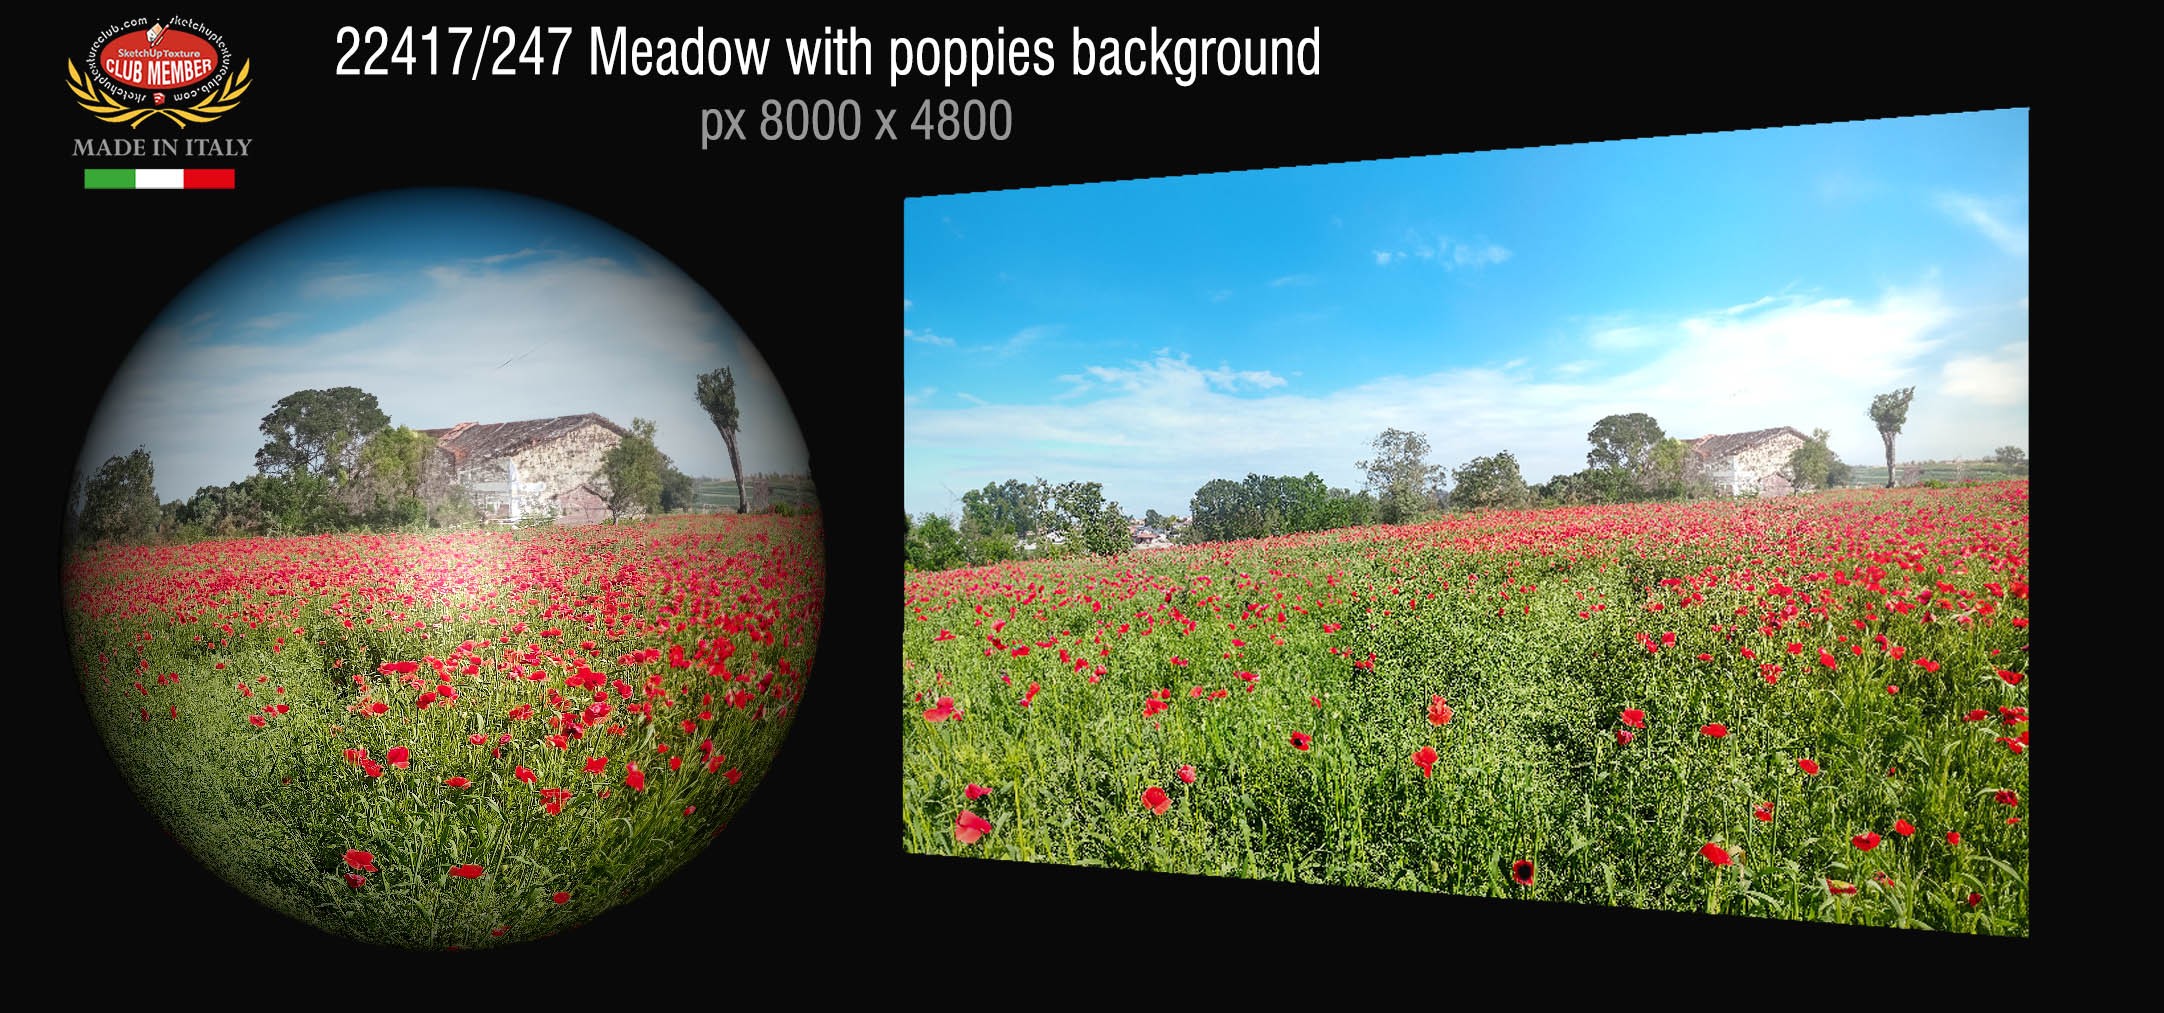 22417_247 Meadow with poppies background